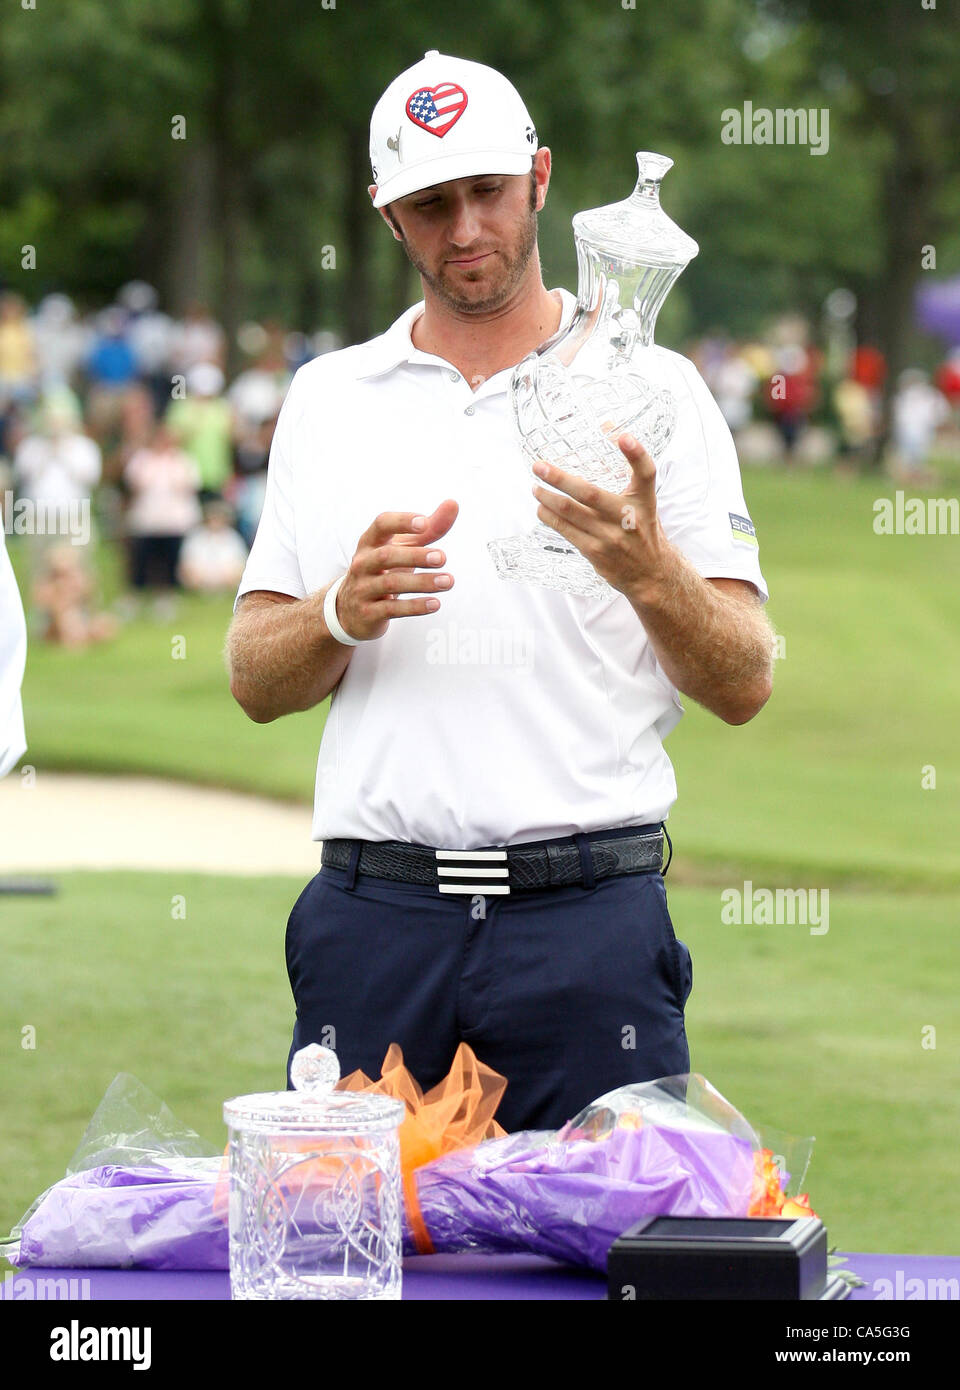 10.06.2012. Memphis, USA.  Dustin Johnson accepting championship trophy after winning the FedEx St. Jude Classic at TPC Southwind Memphis, TN. Stock Photo